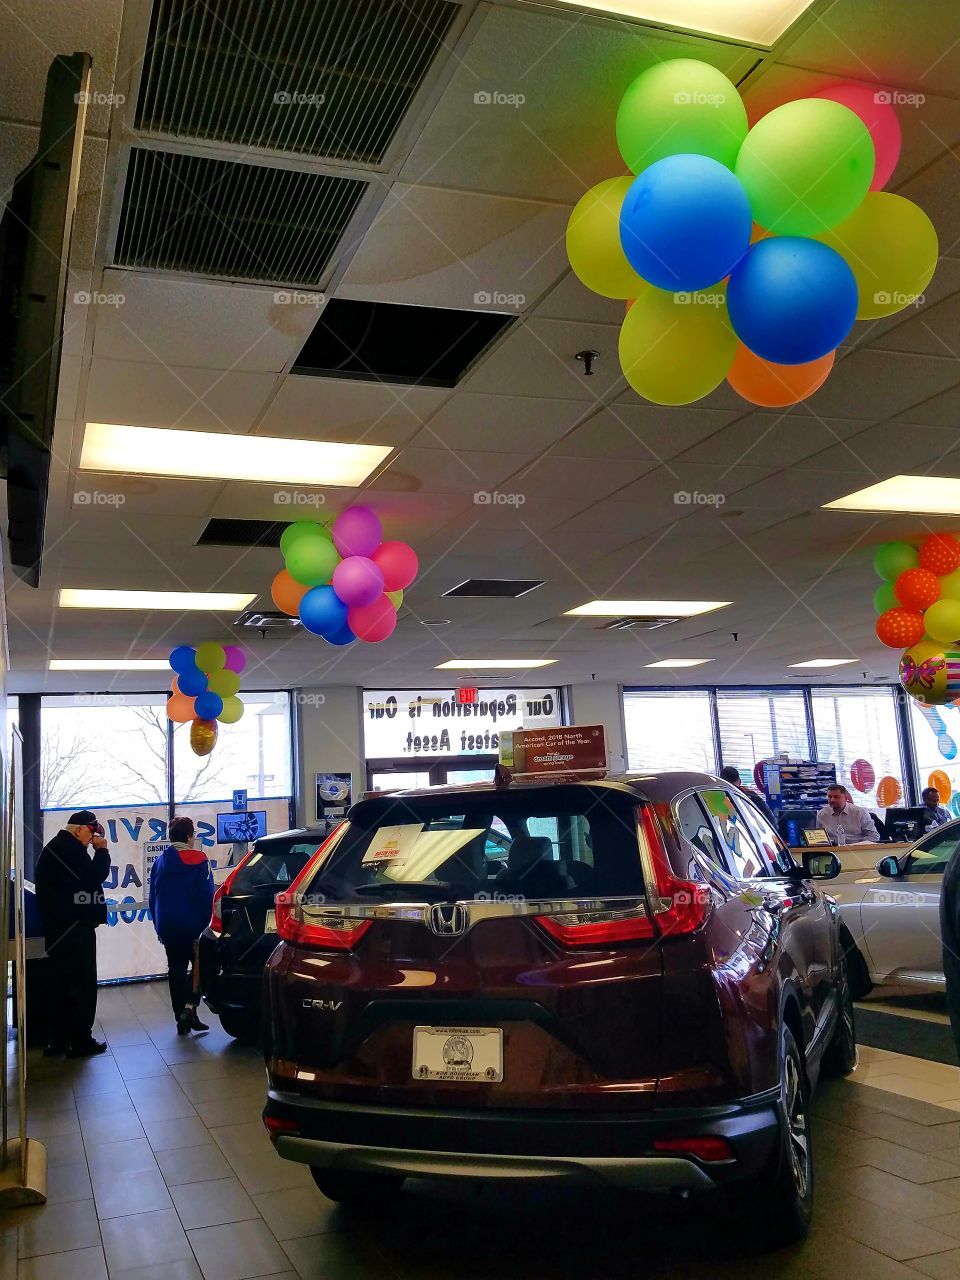 buying a new car